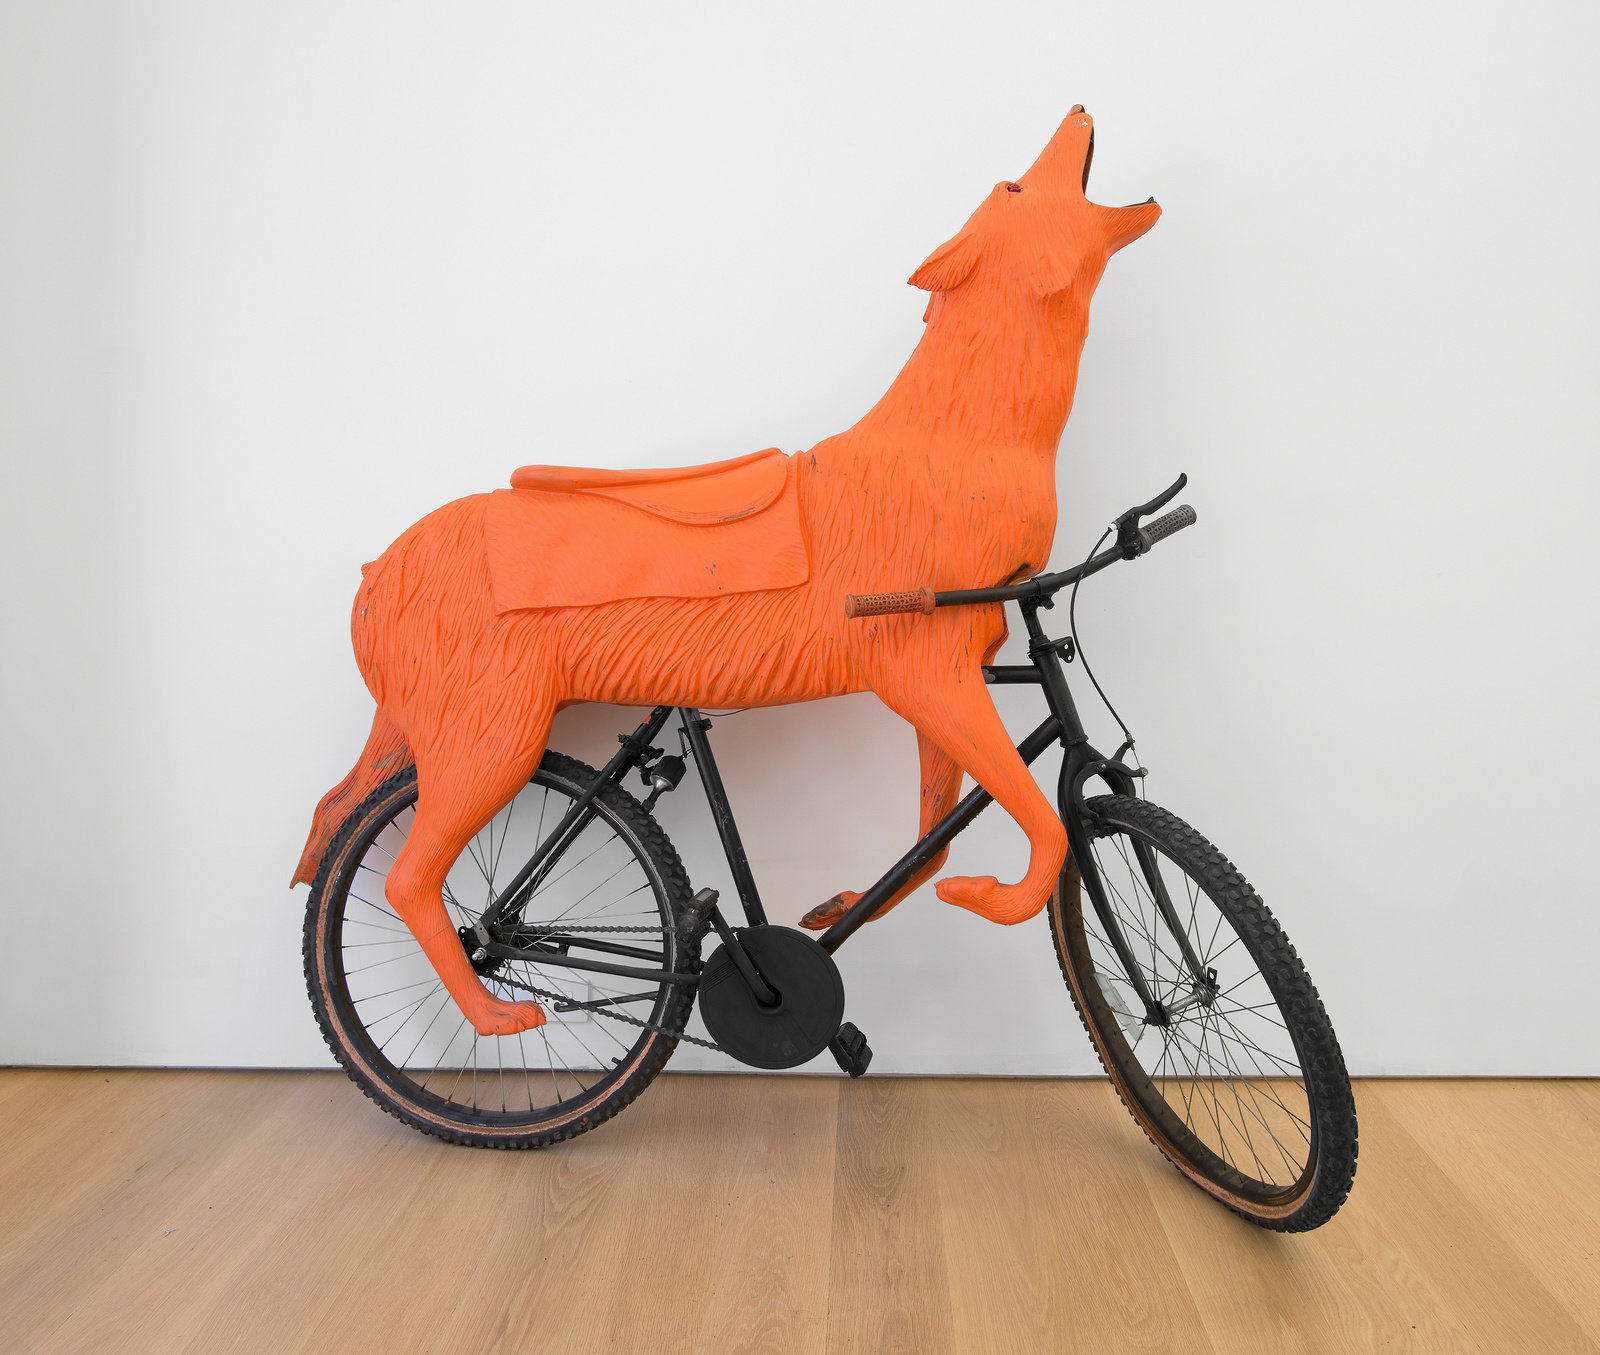 Coffin, peter, wolf cycle, 2006, fiberglass and bicycle, 69 x 71 x 24 in. 175.26 x 180.34 x 60.96 cm photo credit bill orcutt